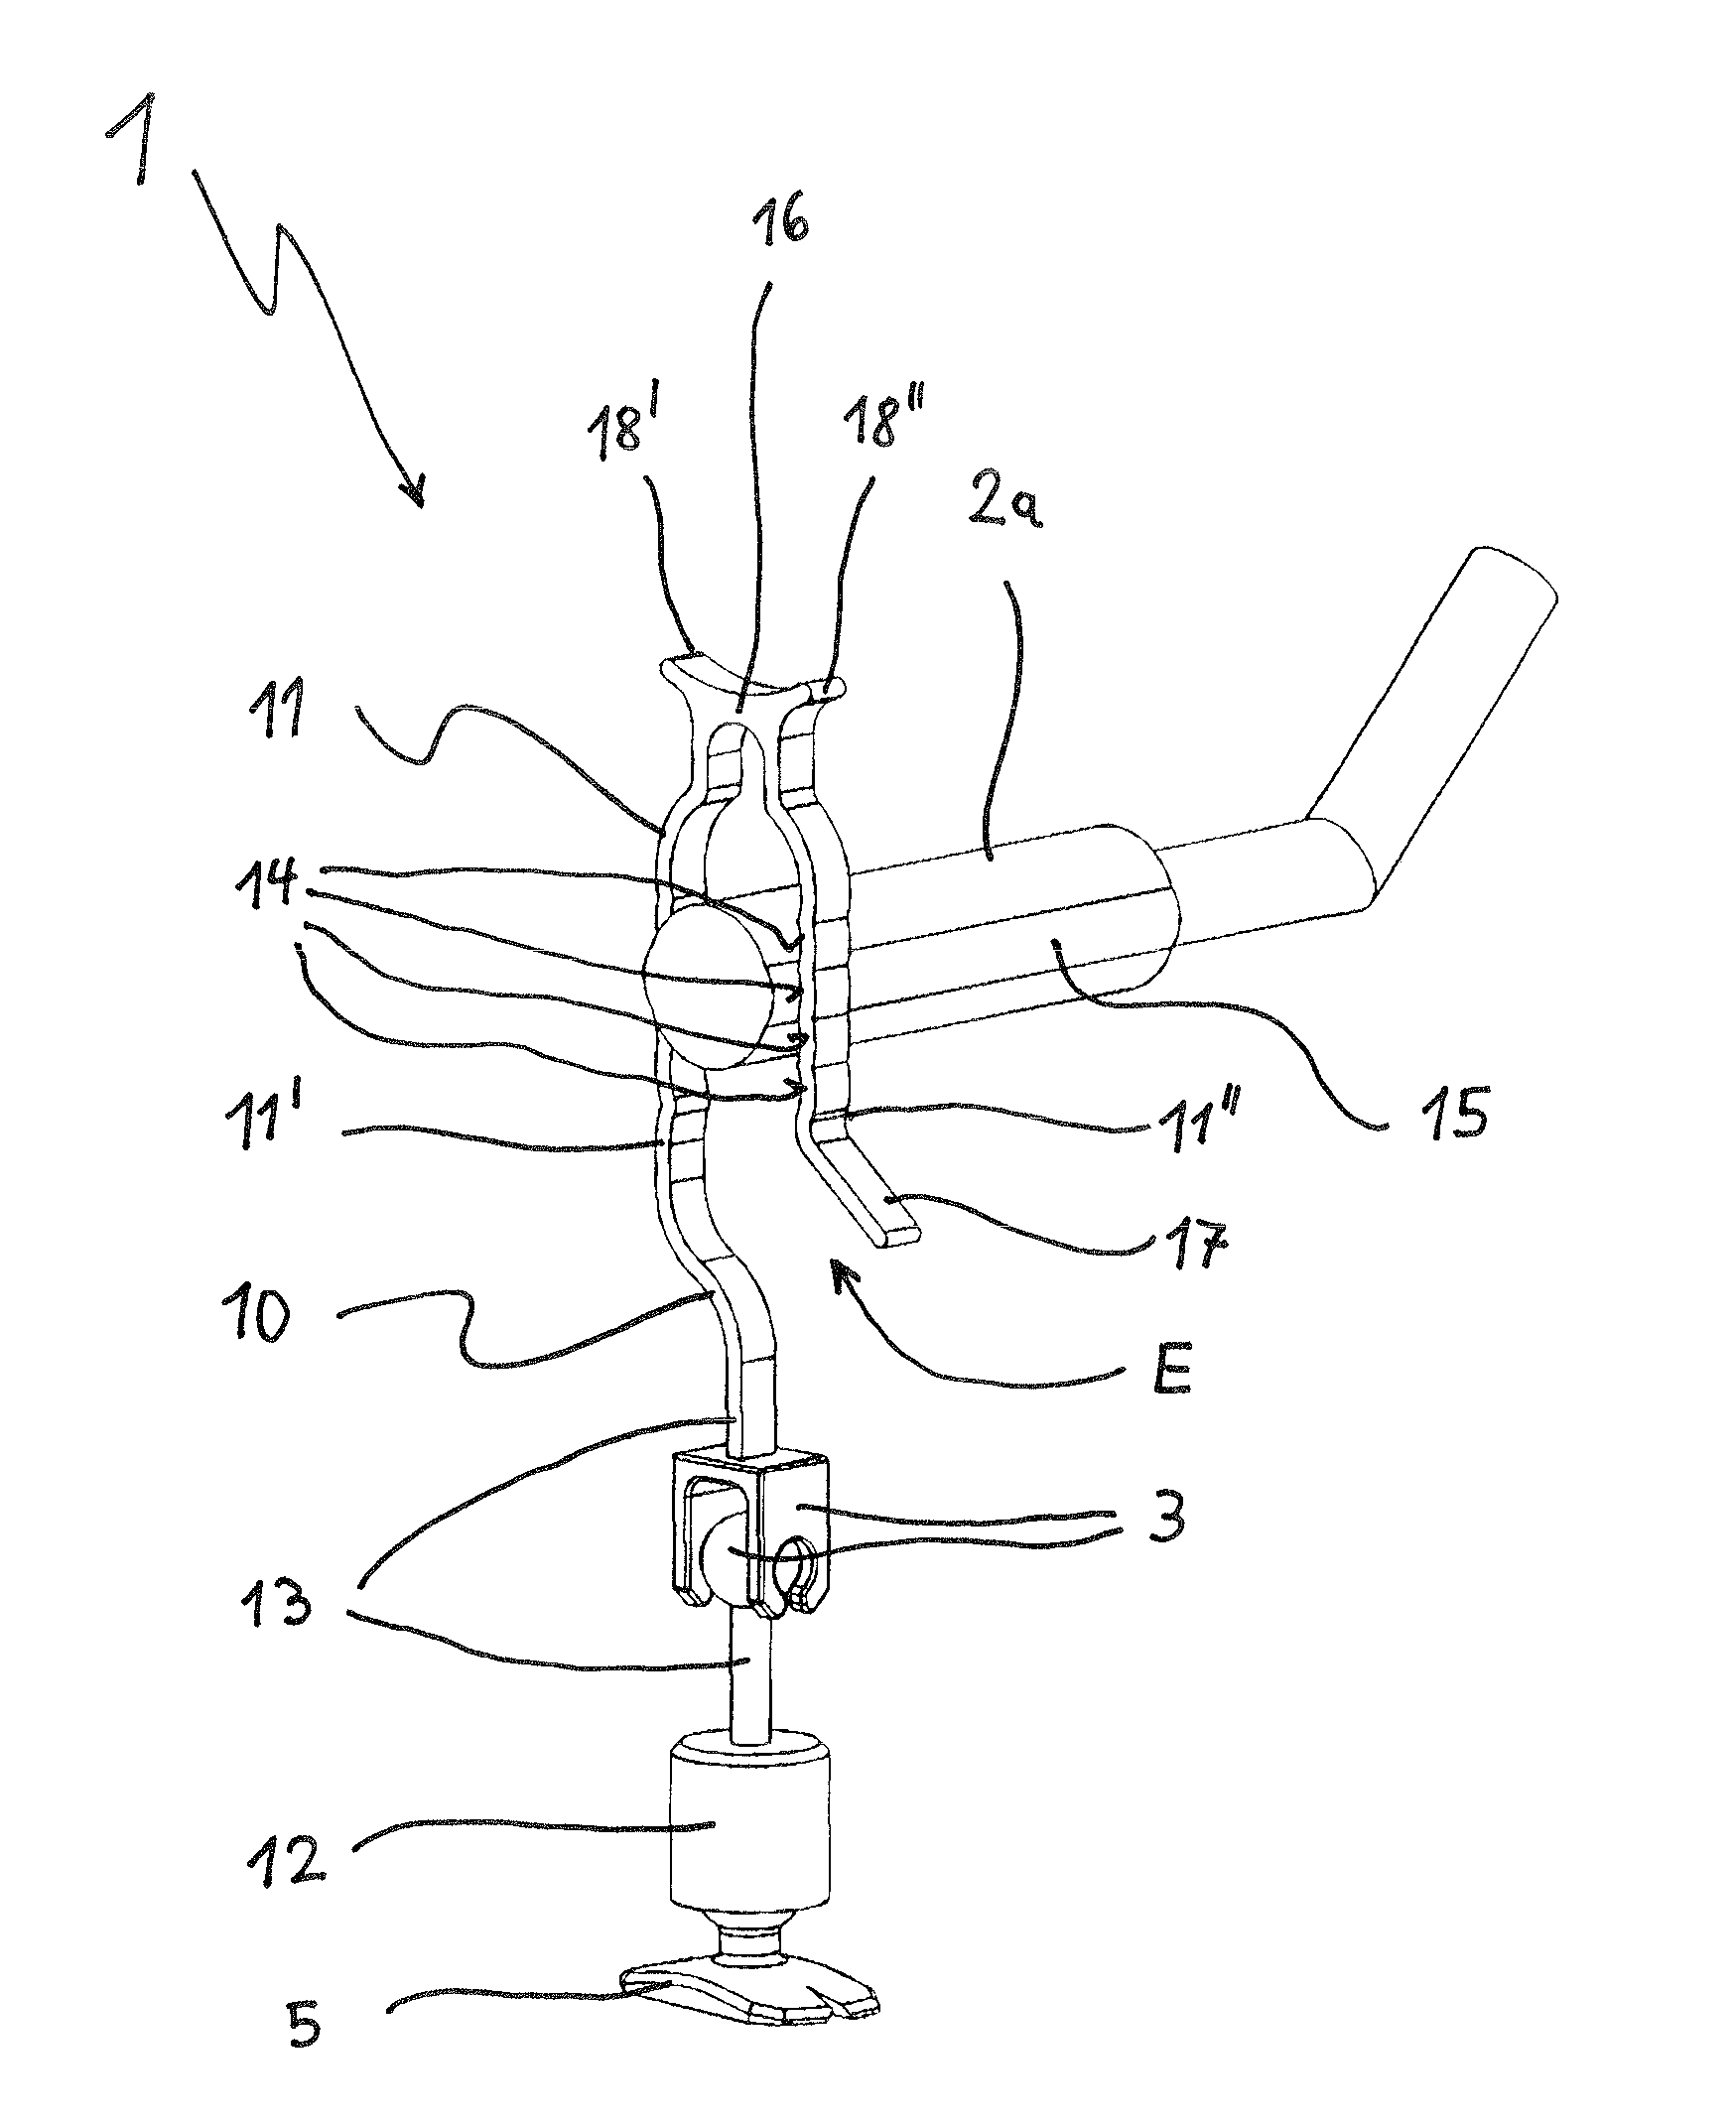 Device for variable-length fixing of the actuator end piece of an active hearing implant in the middle ear